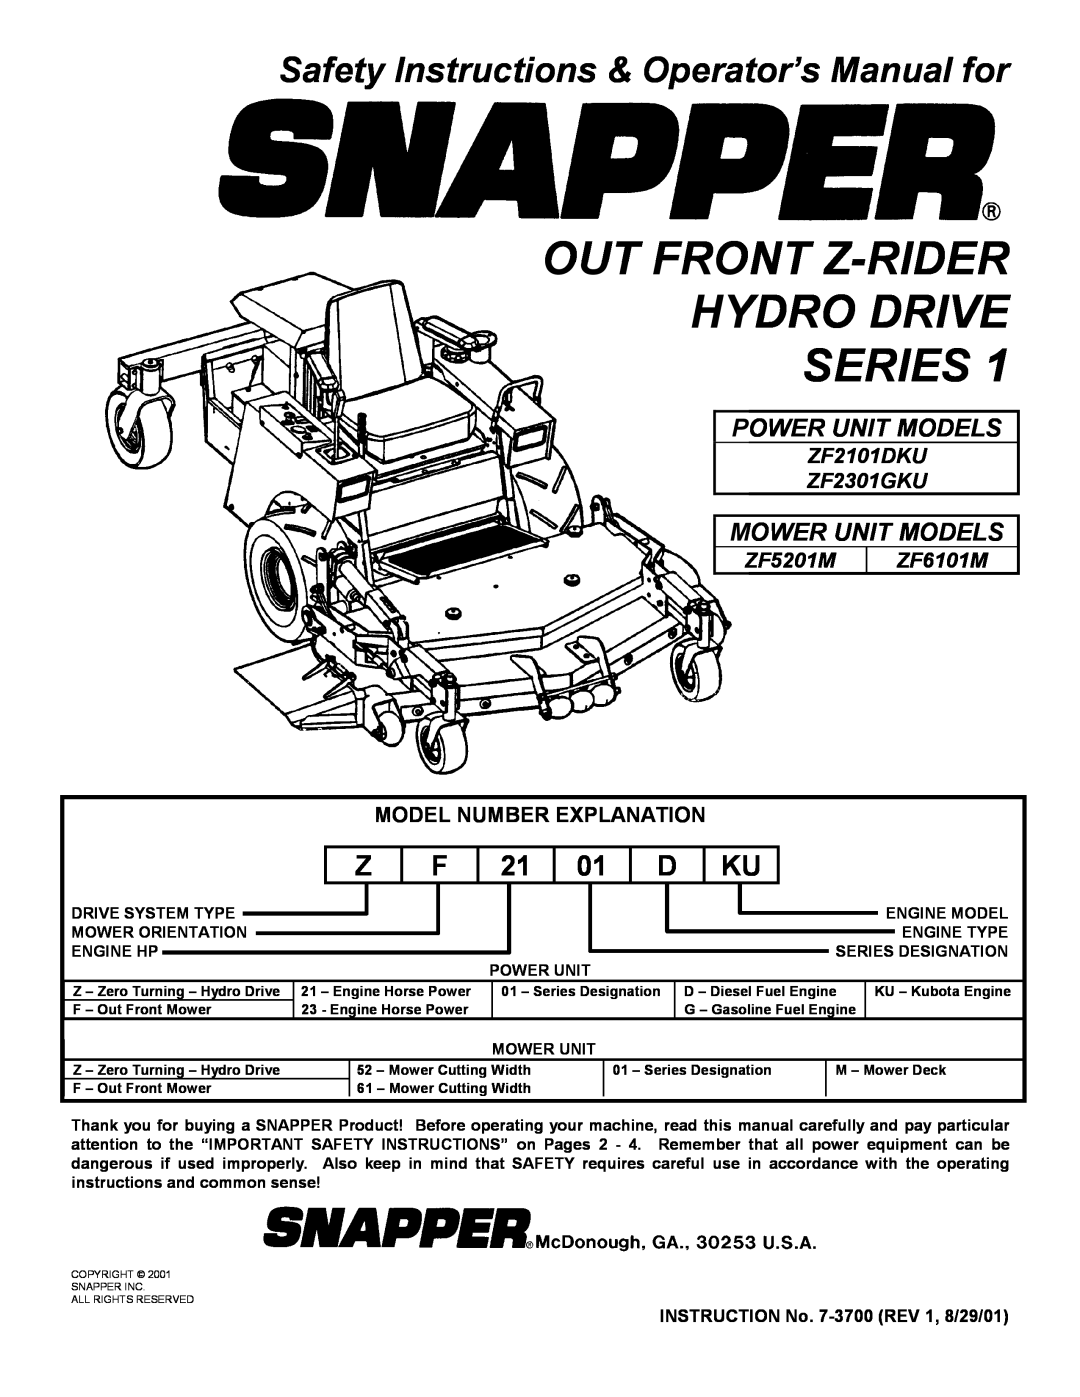 Snapper ZF6101M important safety instructions Safety Instructions & Operator’s Manual for, Model Number Explanation 